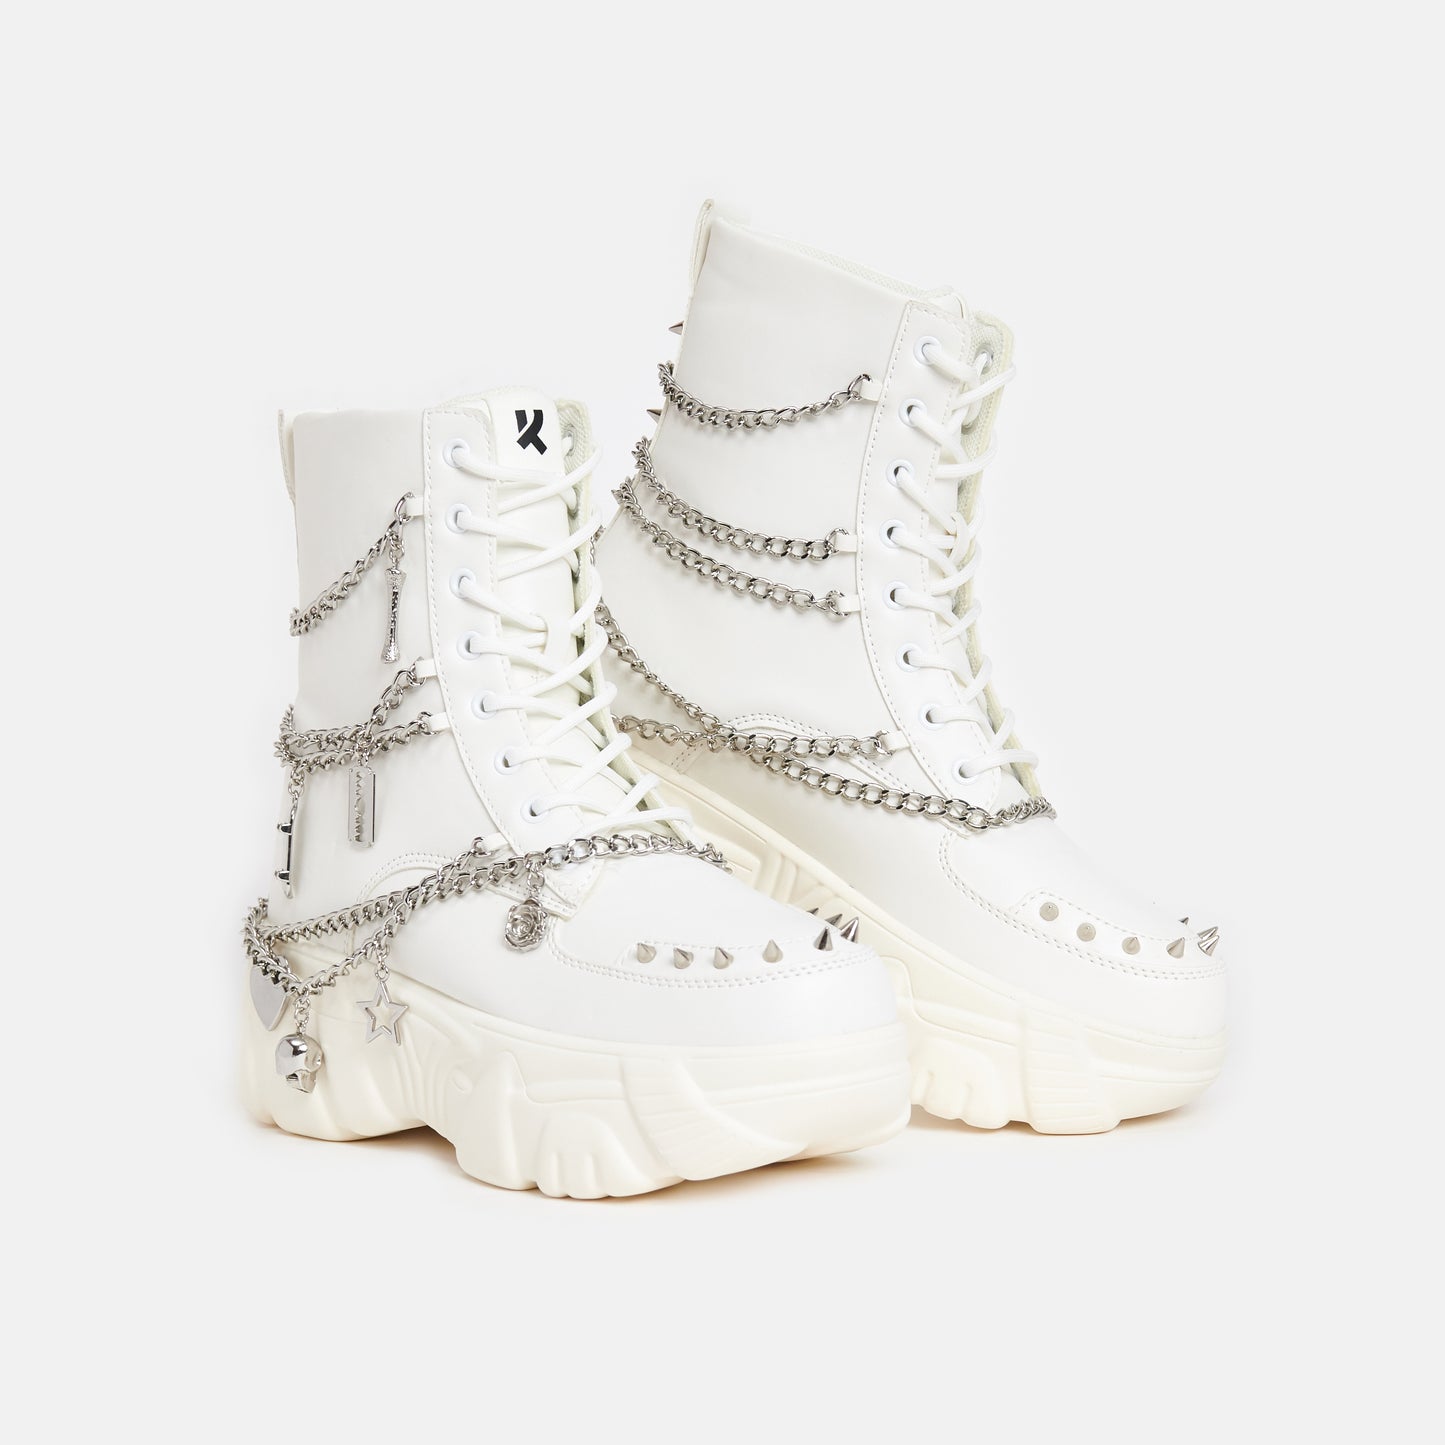 Boned Catch White Mystic Charm Boots - Ankle Boots - KOI Footwear - White - Three-Quarter View